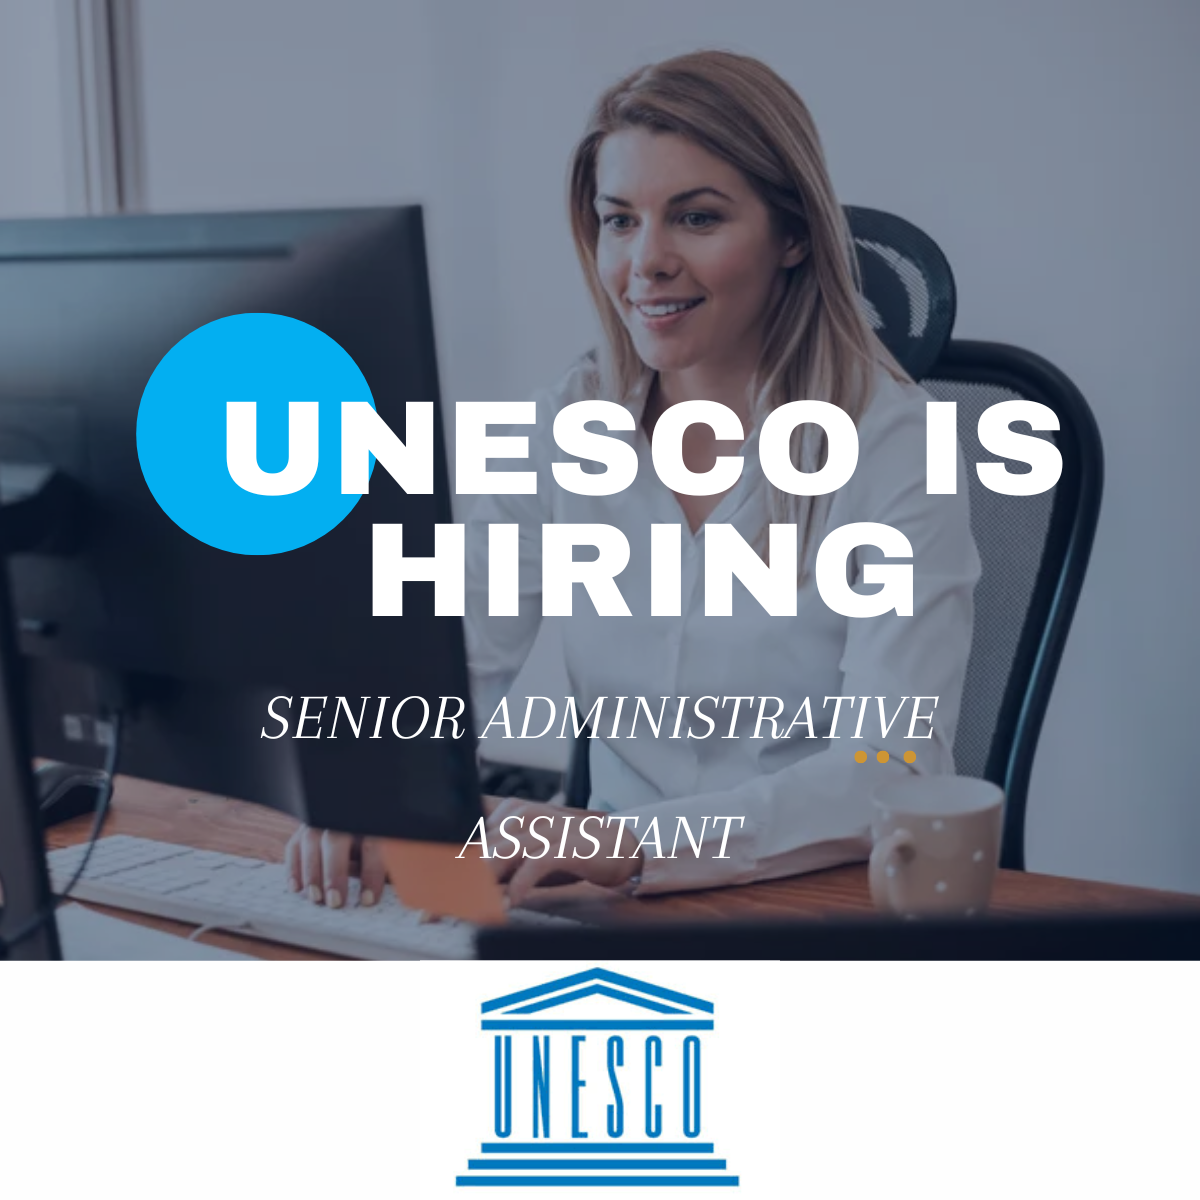 Become a part of UNESCO as a Senior Administrative Assistant. Apply now to make a difference!